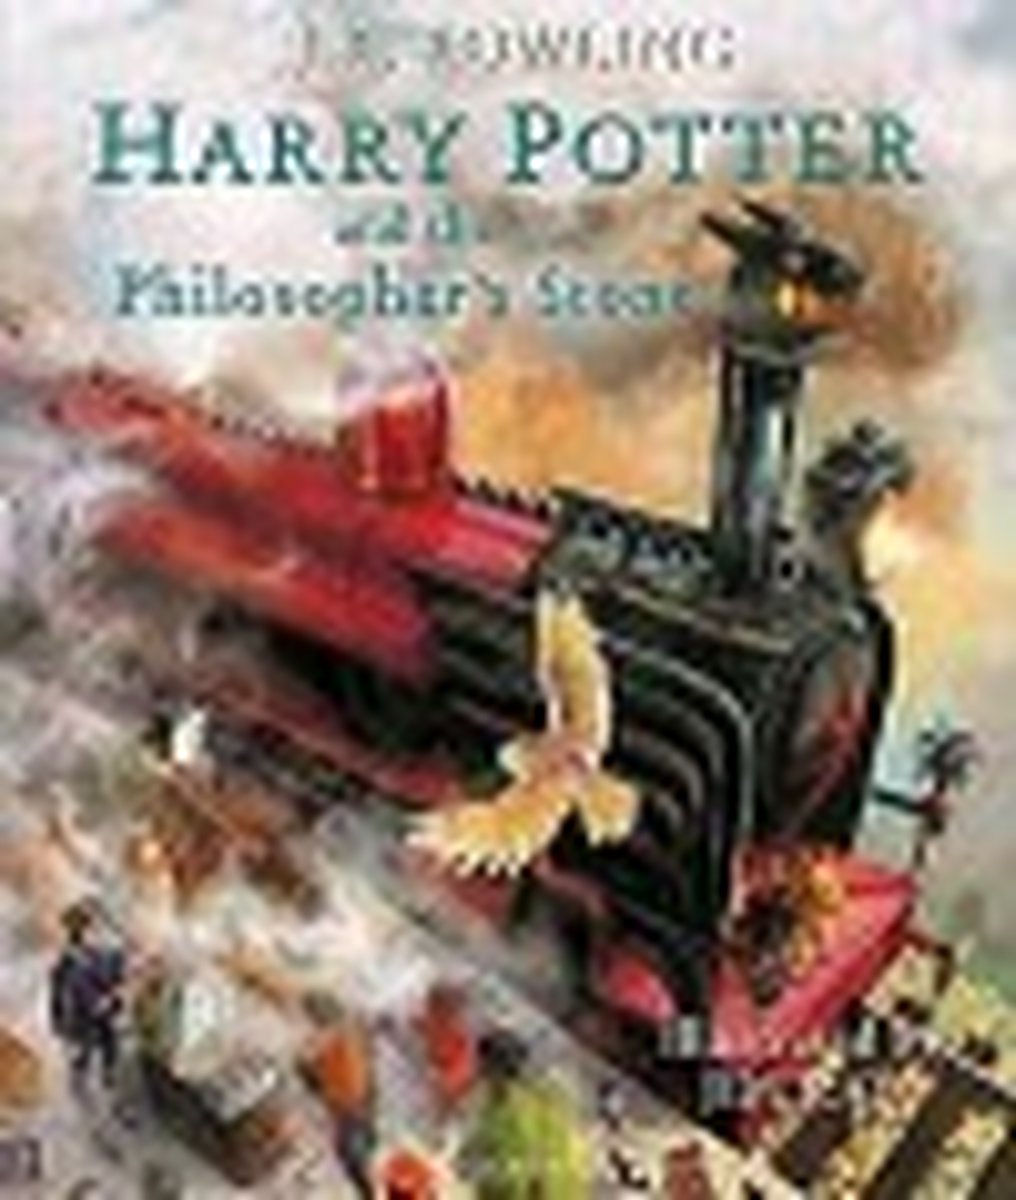 Harry Potter 1 - Harry Potter and the Philosopher's Stone | Illustrated Edition